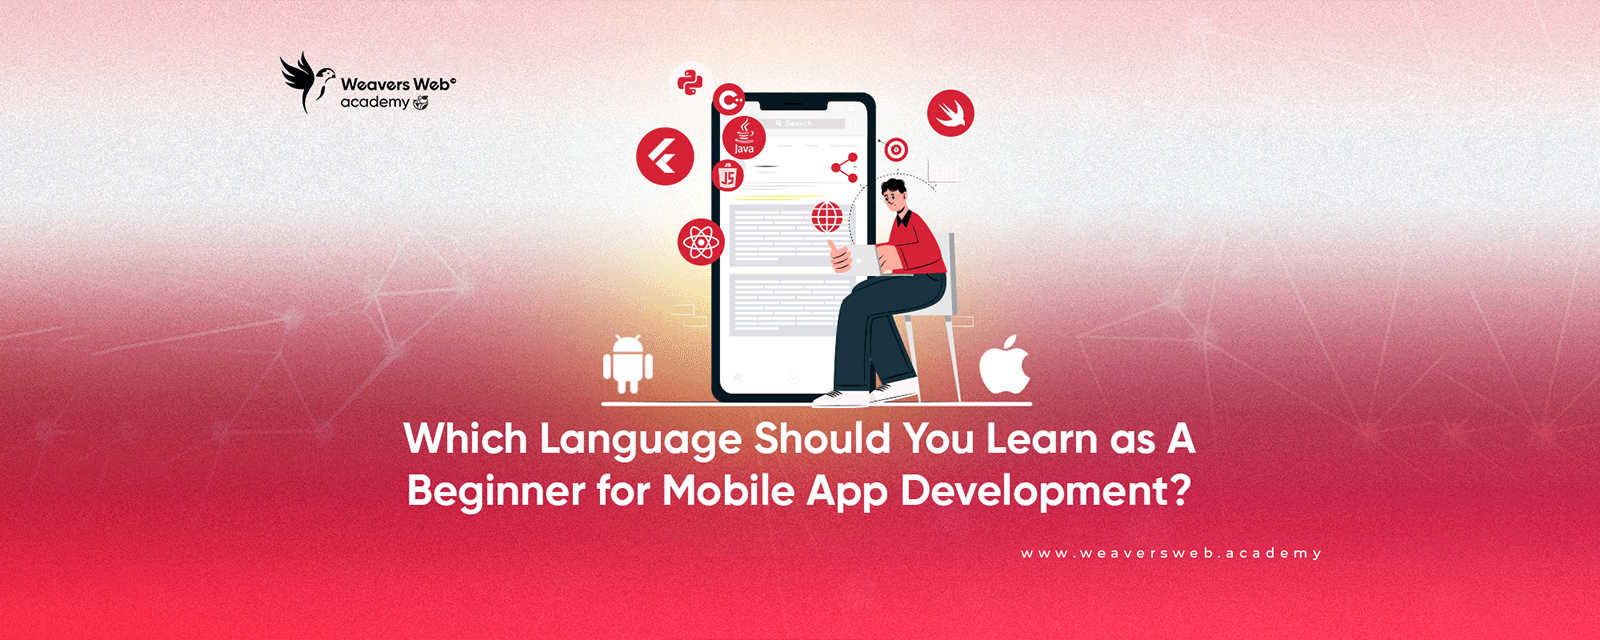 Which Language Should You Learn As A Beginner For Mobile App Development?